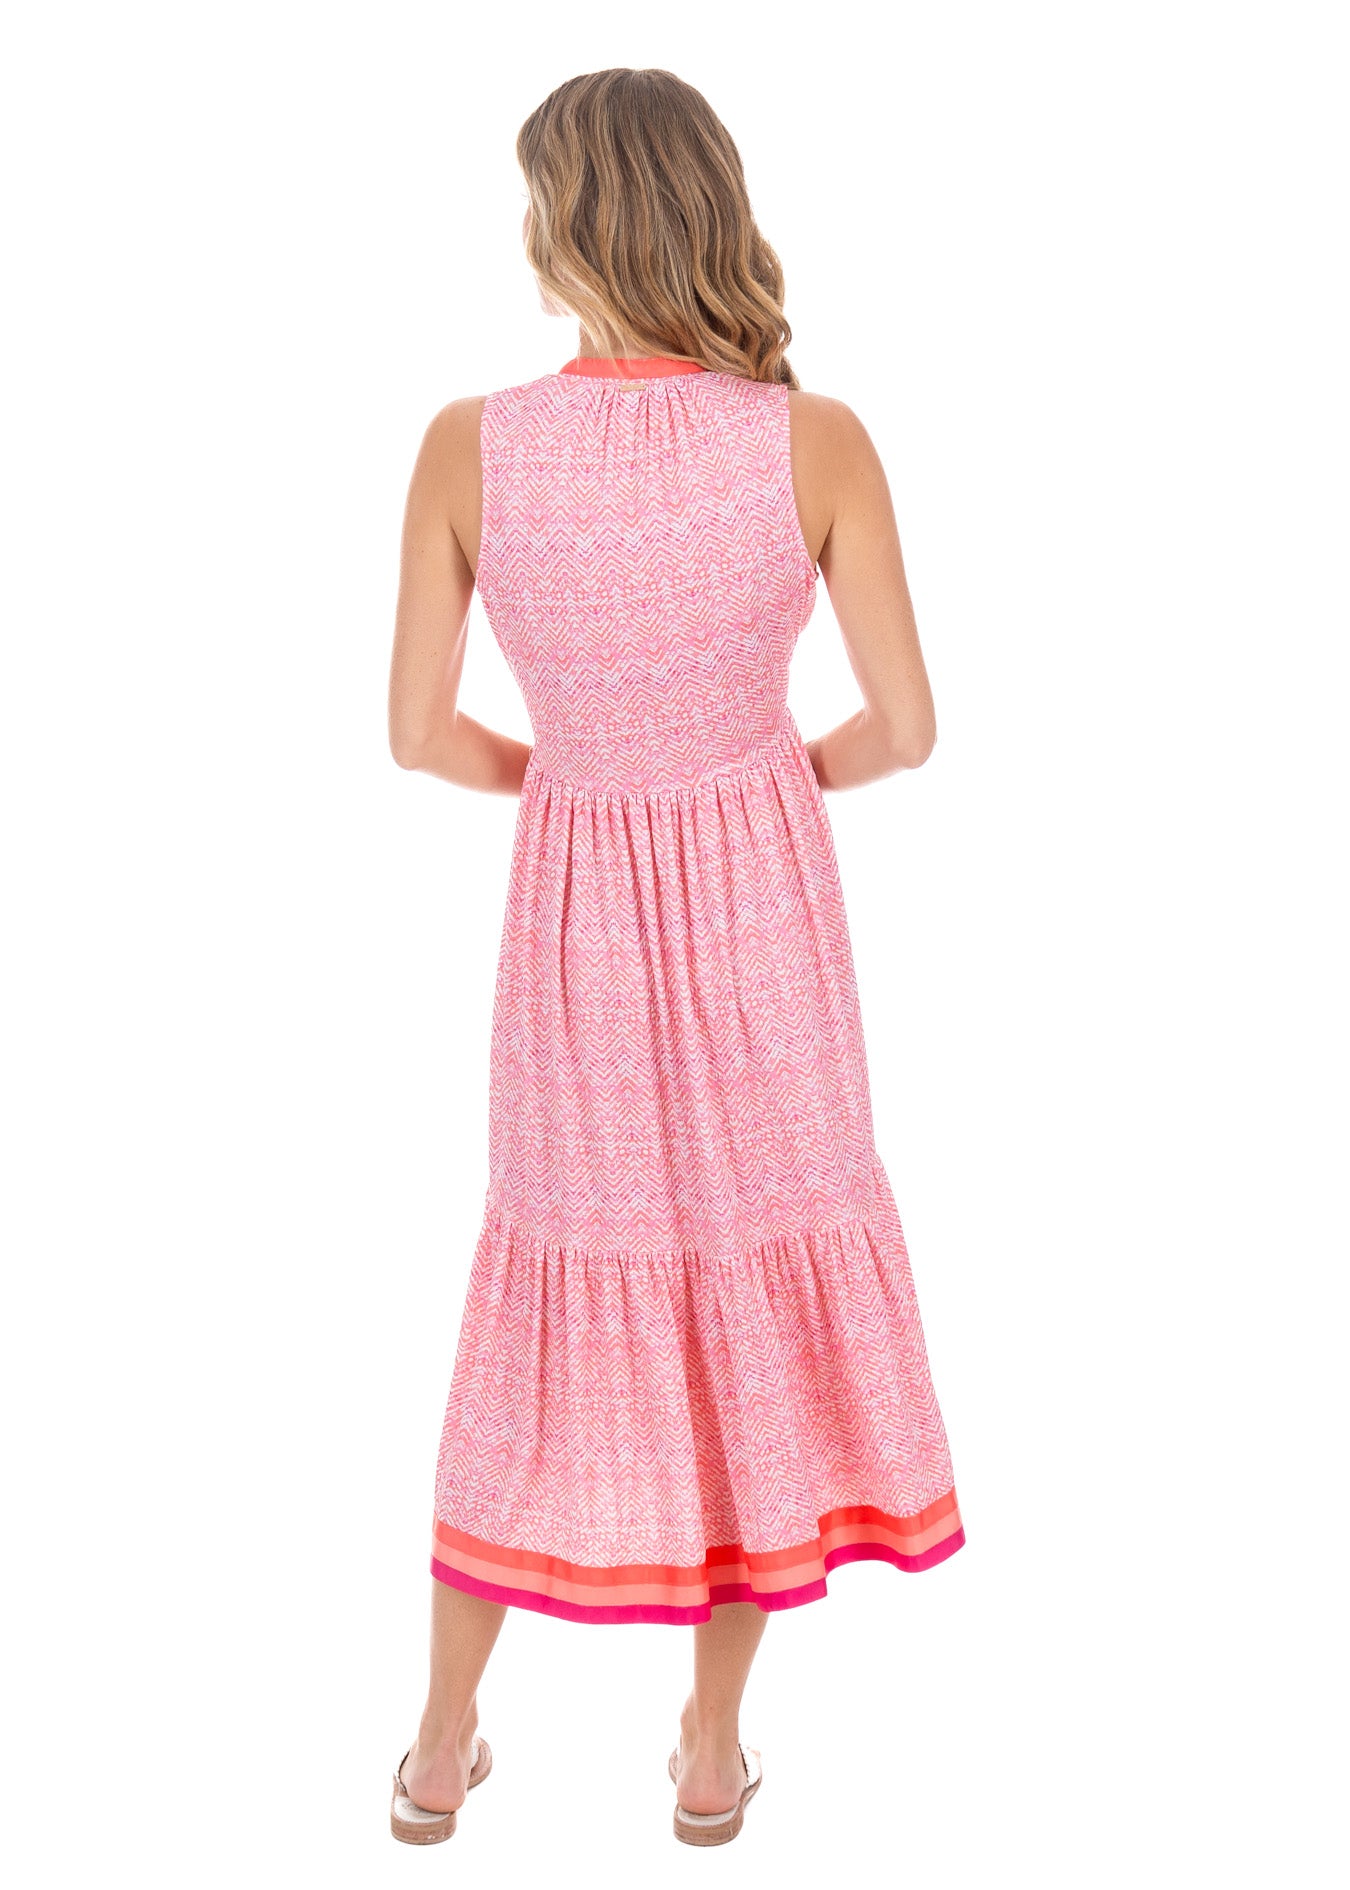 Blonde woman wearing the Algarve Midi Dress, showing the back of the garment.